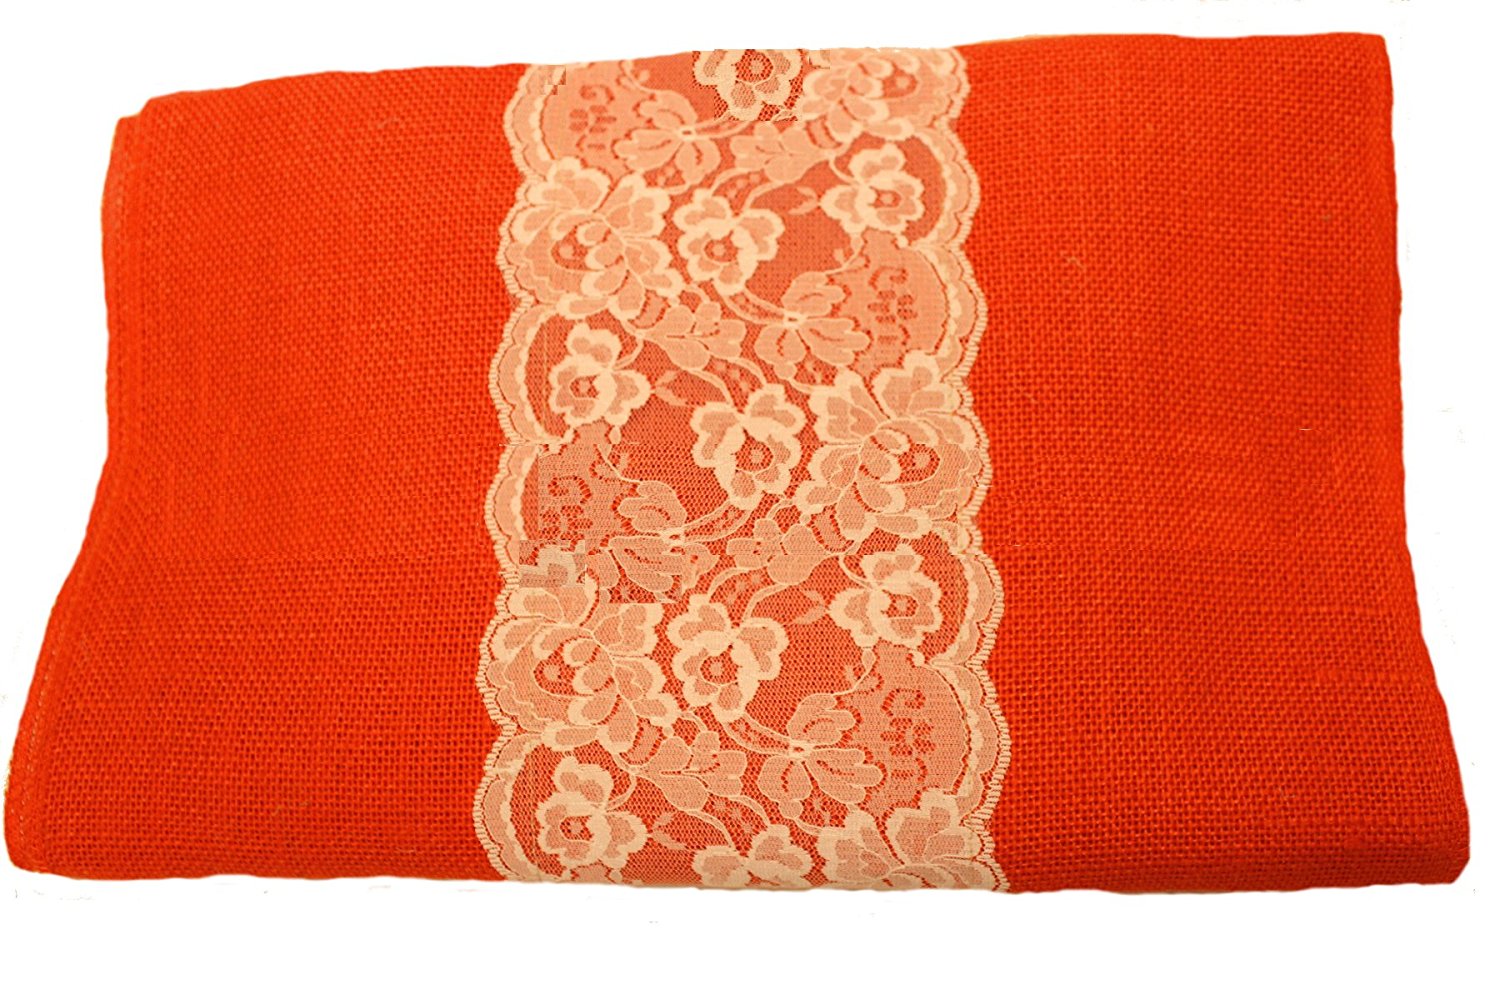 14" Tangerine Burlap Runner with 6" White Lace